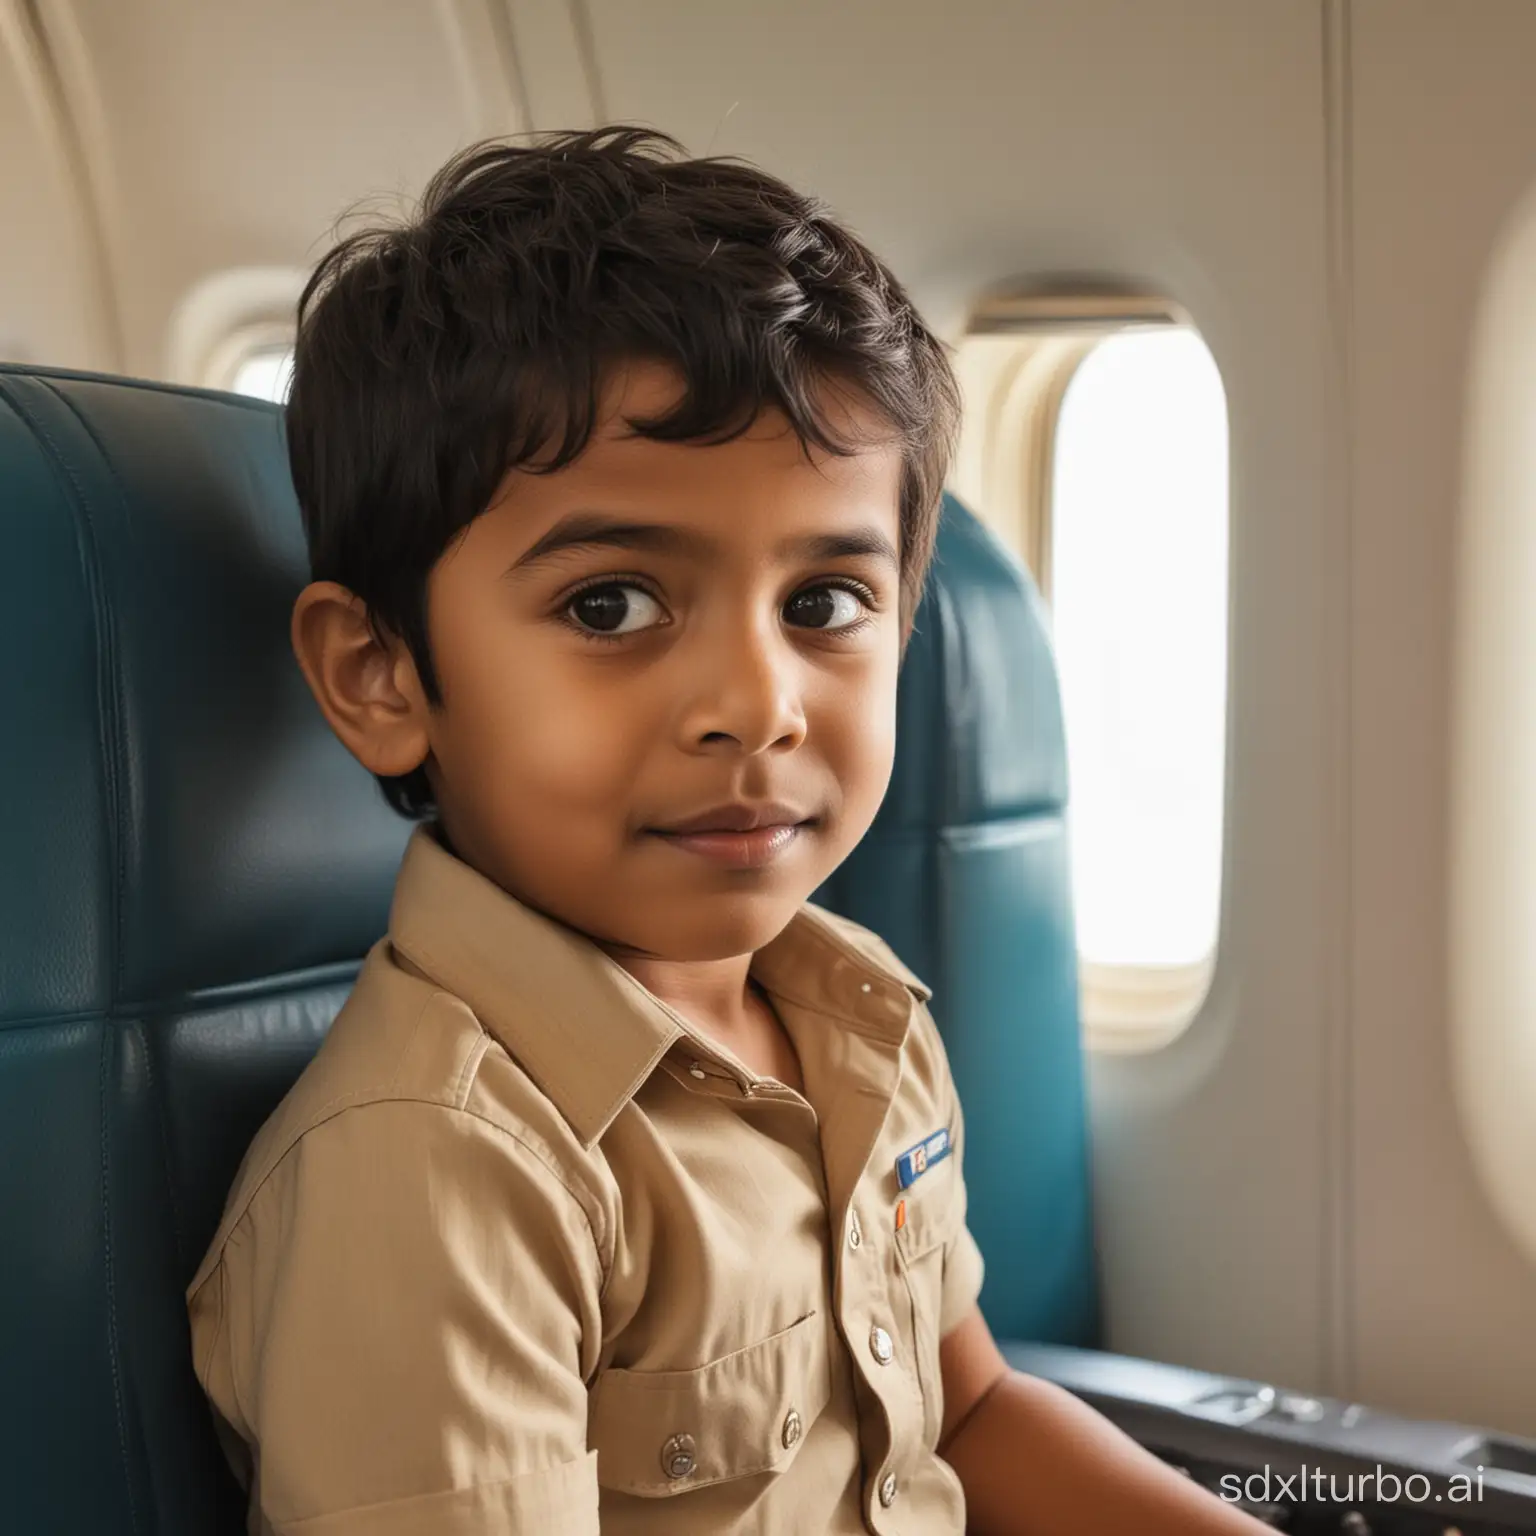 A small Indian 4 years old boy in aeroplane